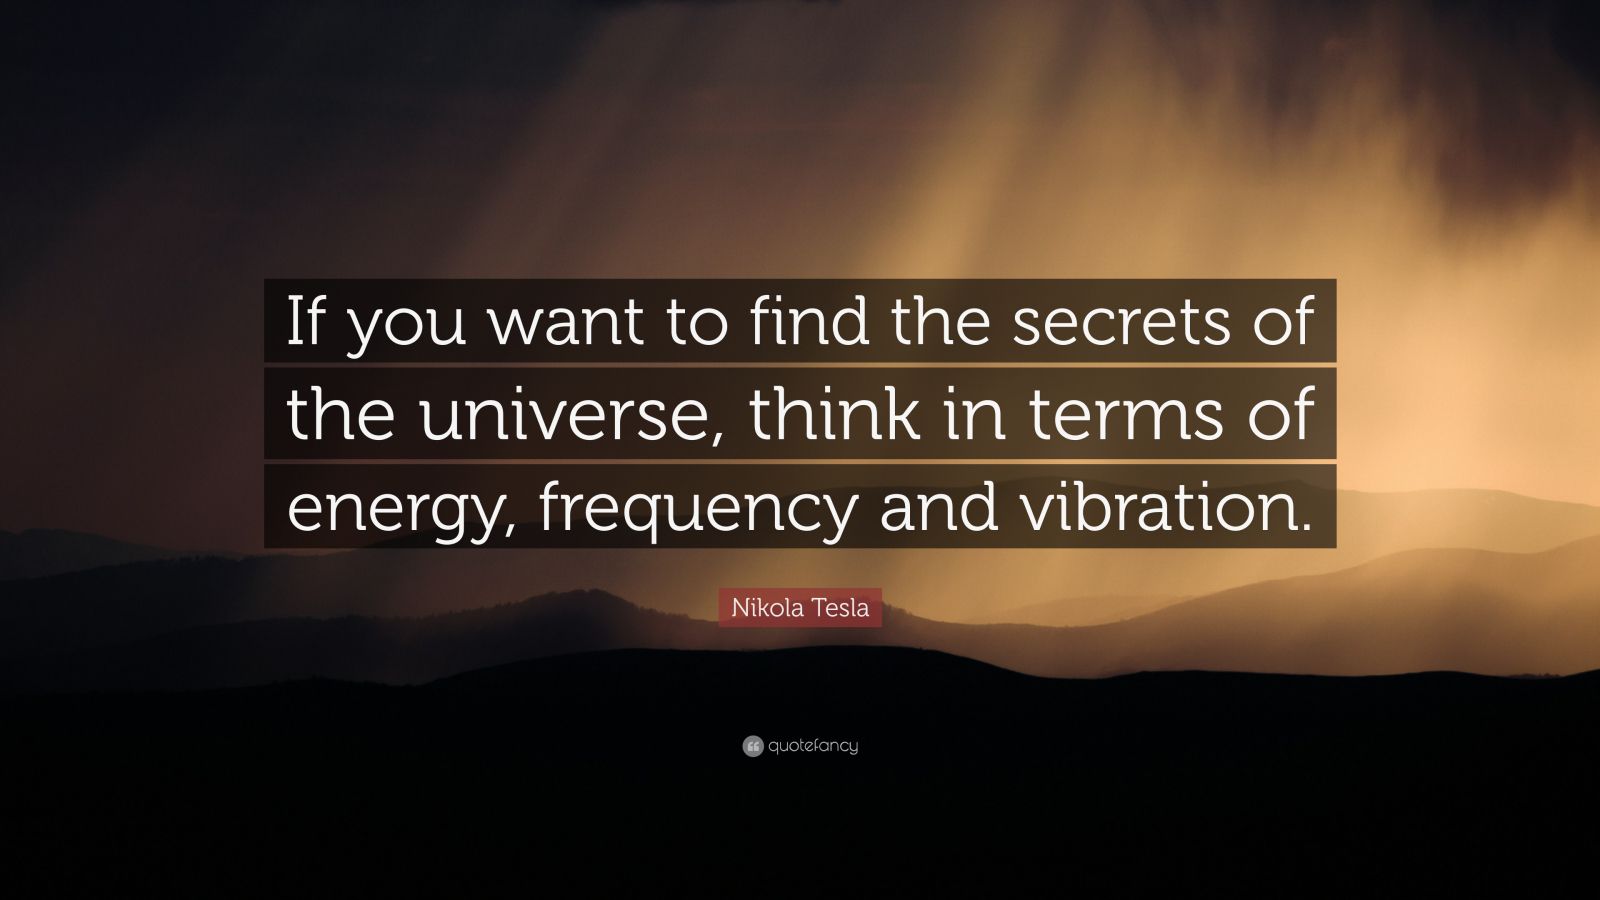 Nikola Tesla Quote: "If you want to find the secrets of the universe, think in terms of energy ...